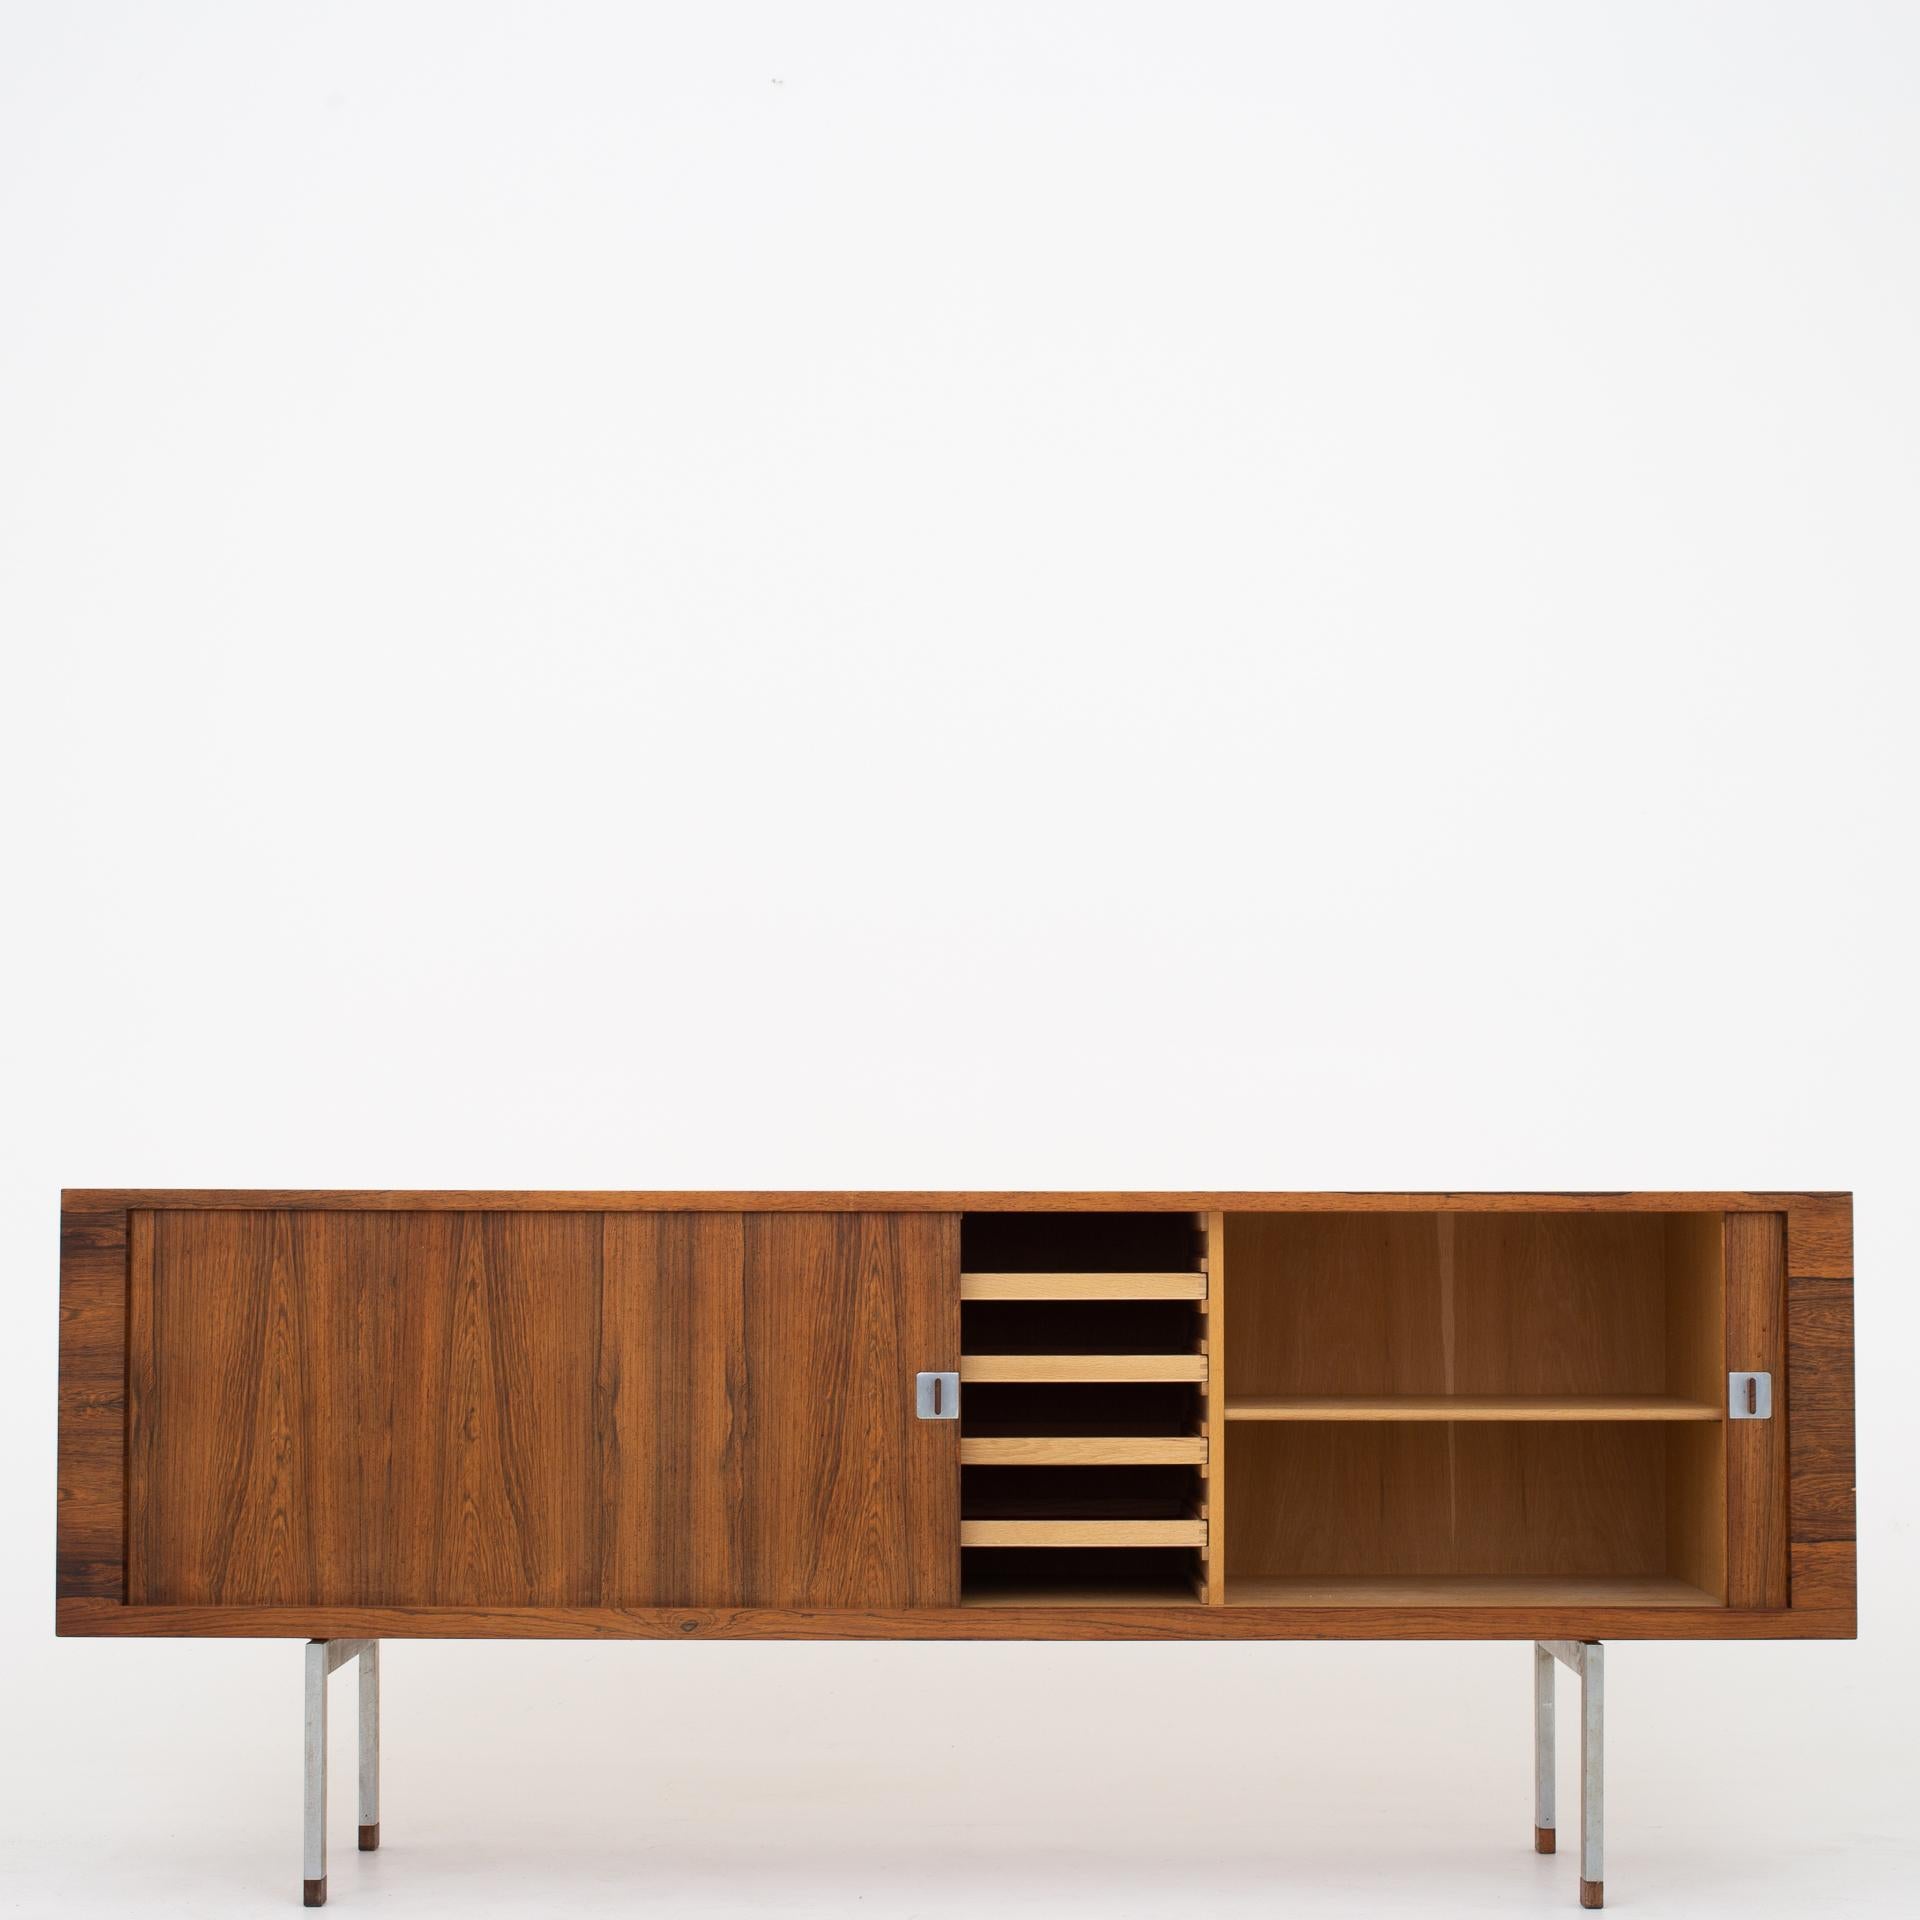 RY 25 - Sideboard in rosewood with legs of steel and shoes of rosewood. Maker RY møbler.